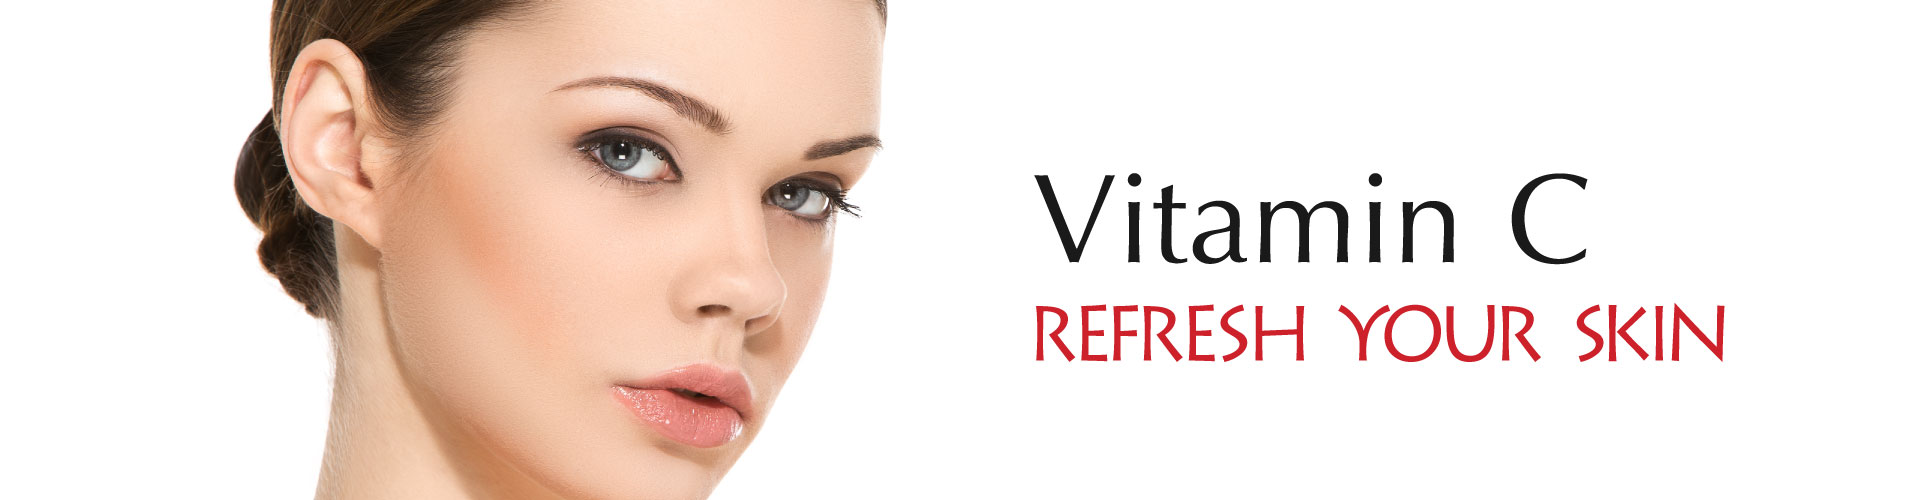 Vitamin C Serum - ALBADERM Middle East - Skincare Products